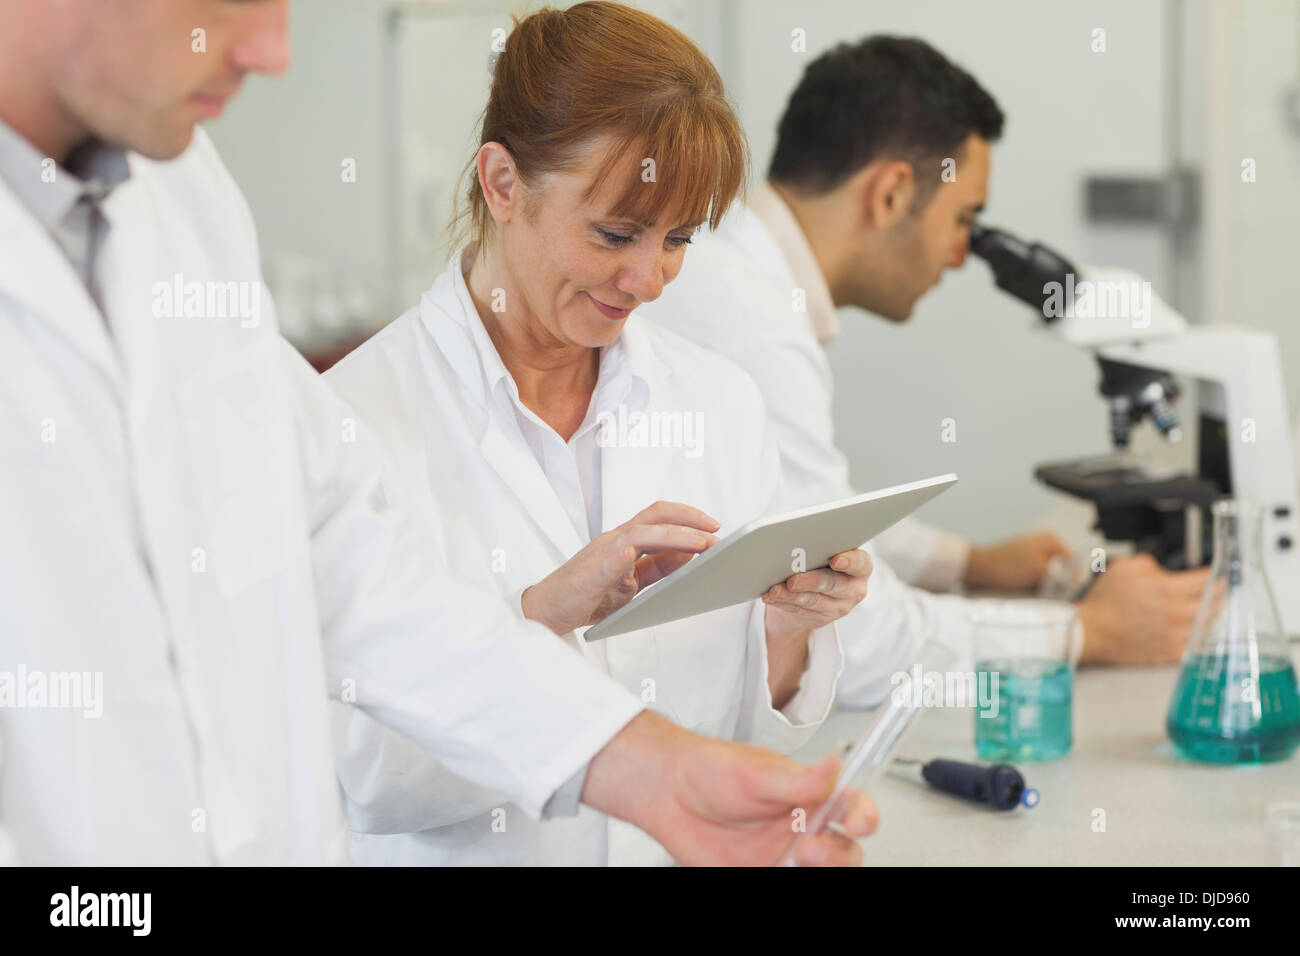 Amused mature scientist working with her tablet Stock Photo